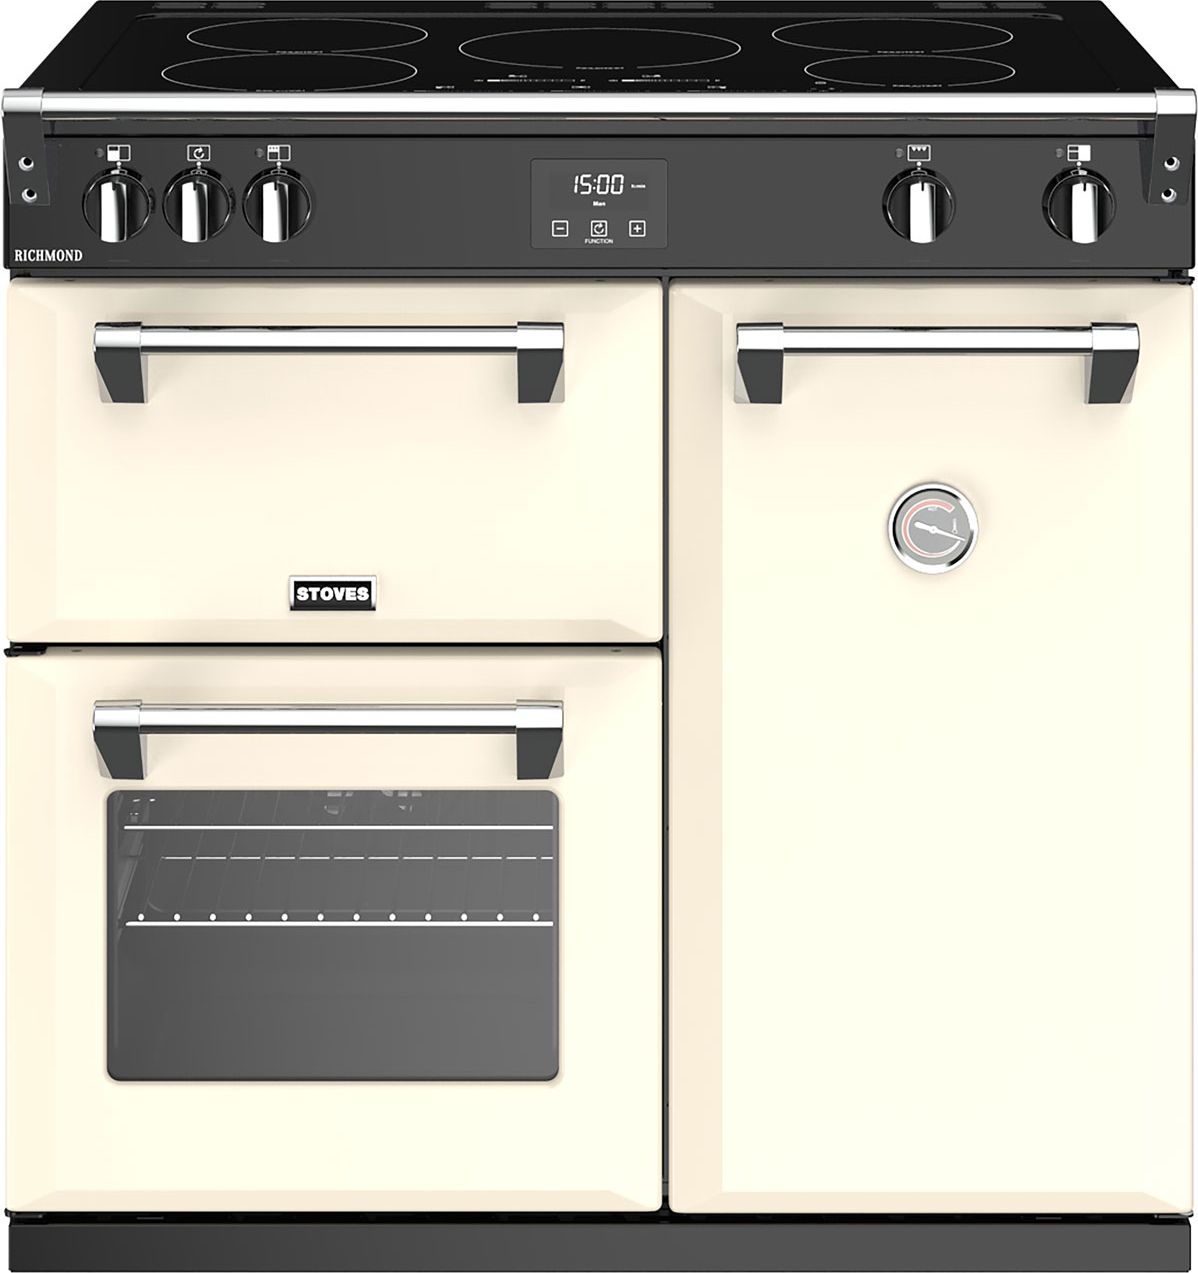 Stoves Richmond S900Ei 90cm Electric Range Cooker with Induction Hob - Cream - A/A/A Rated, Cream